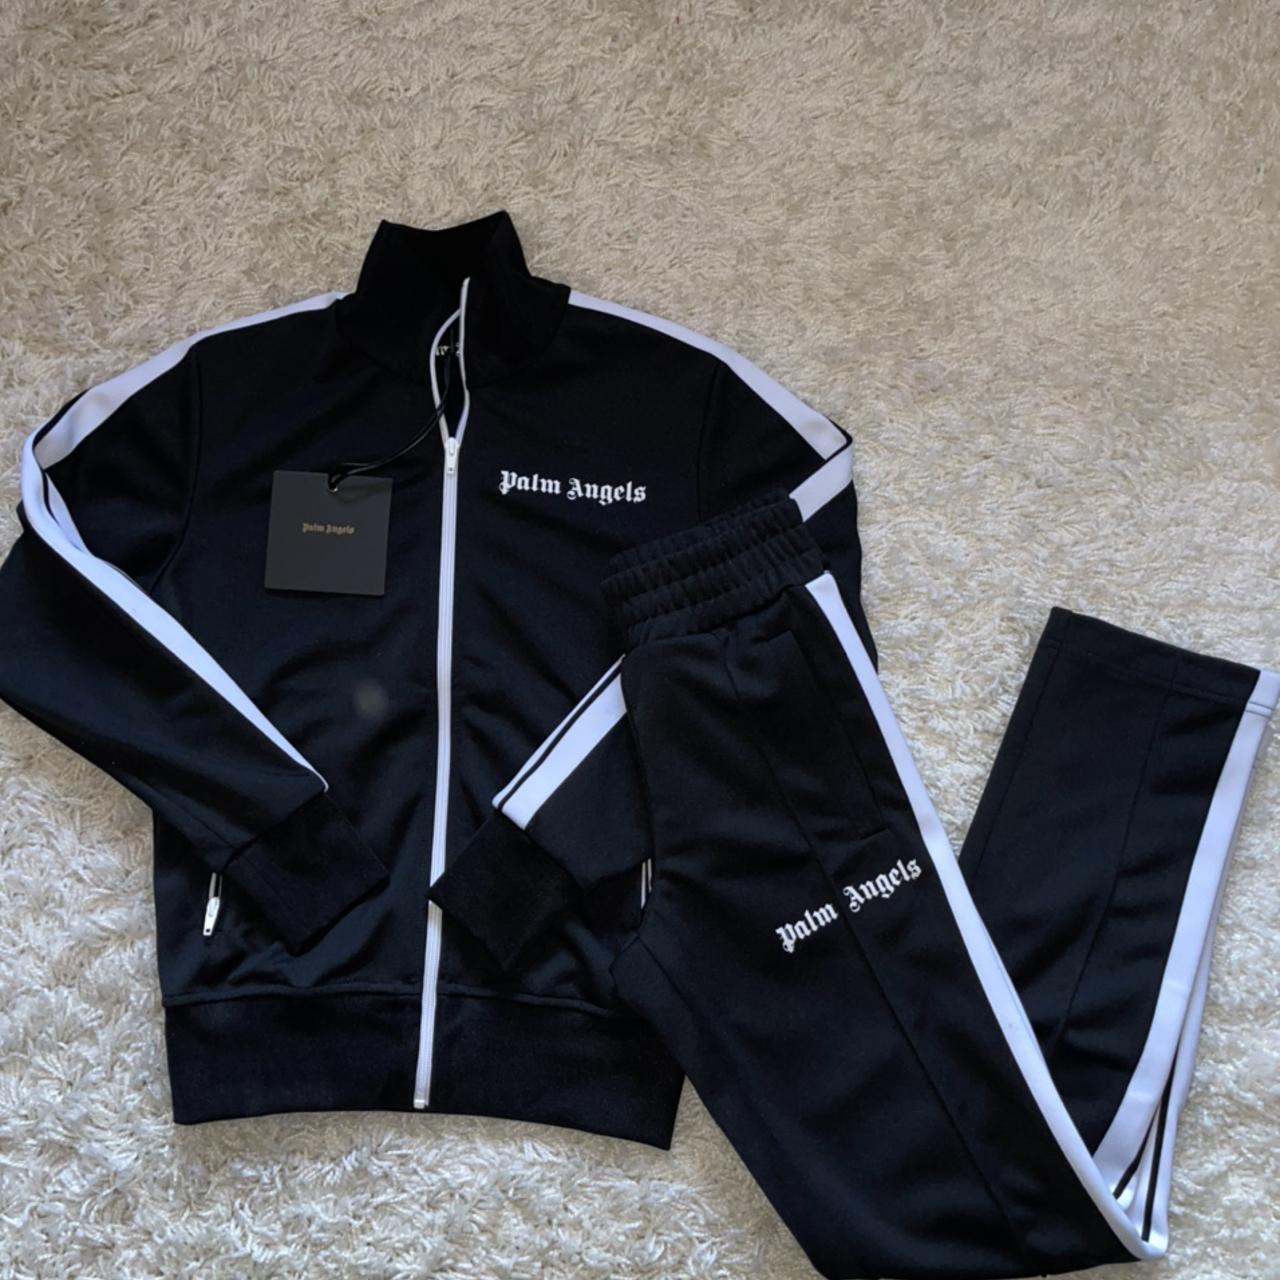 Palm Angels tracksuit set, available to buy as - Depop